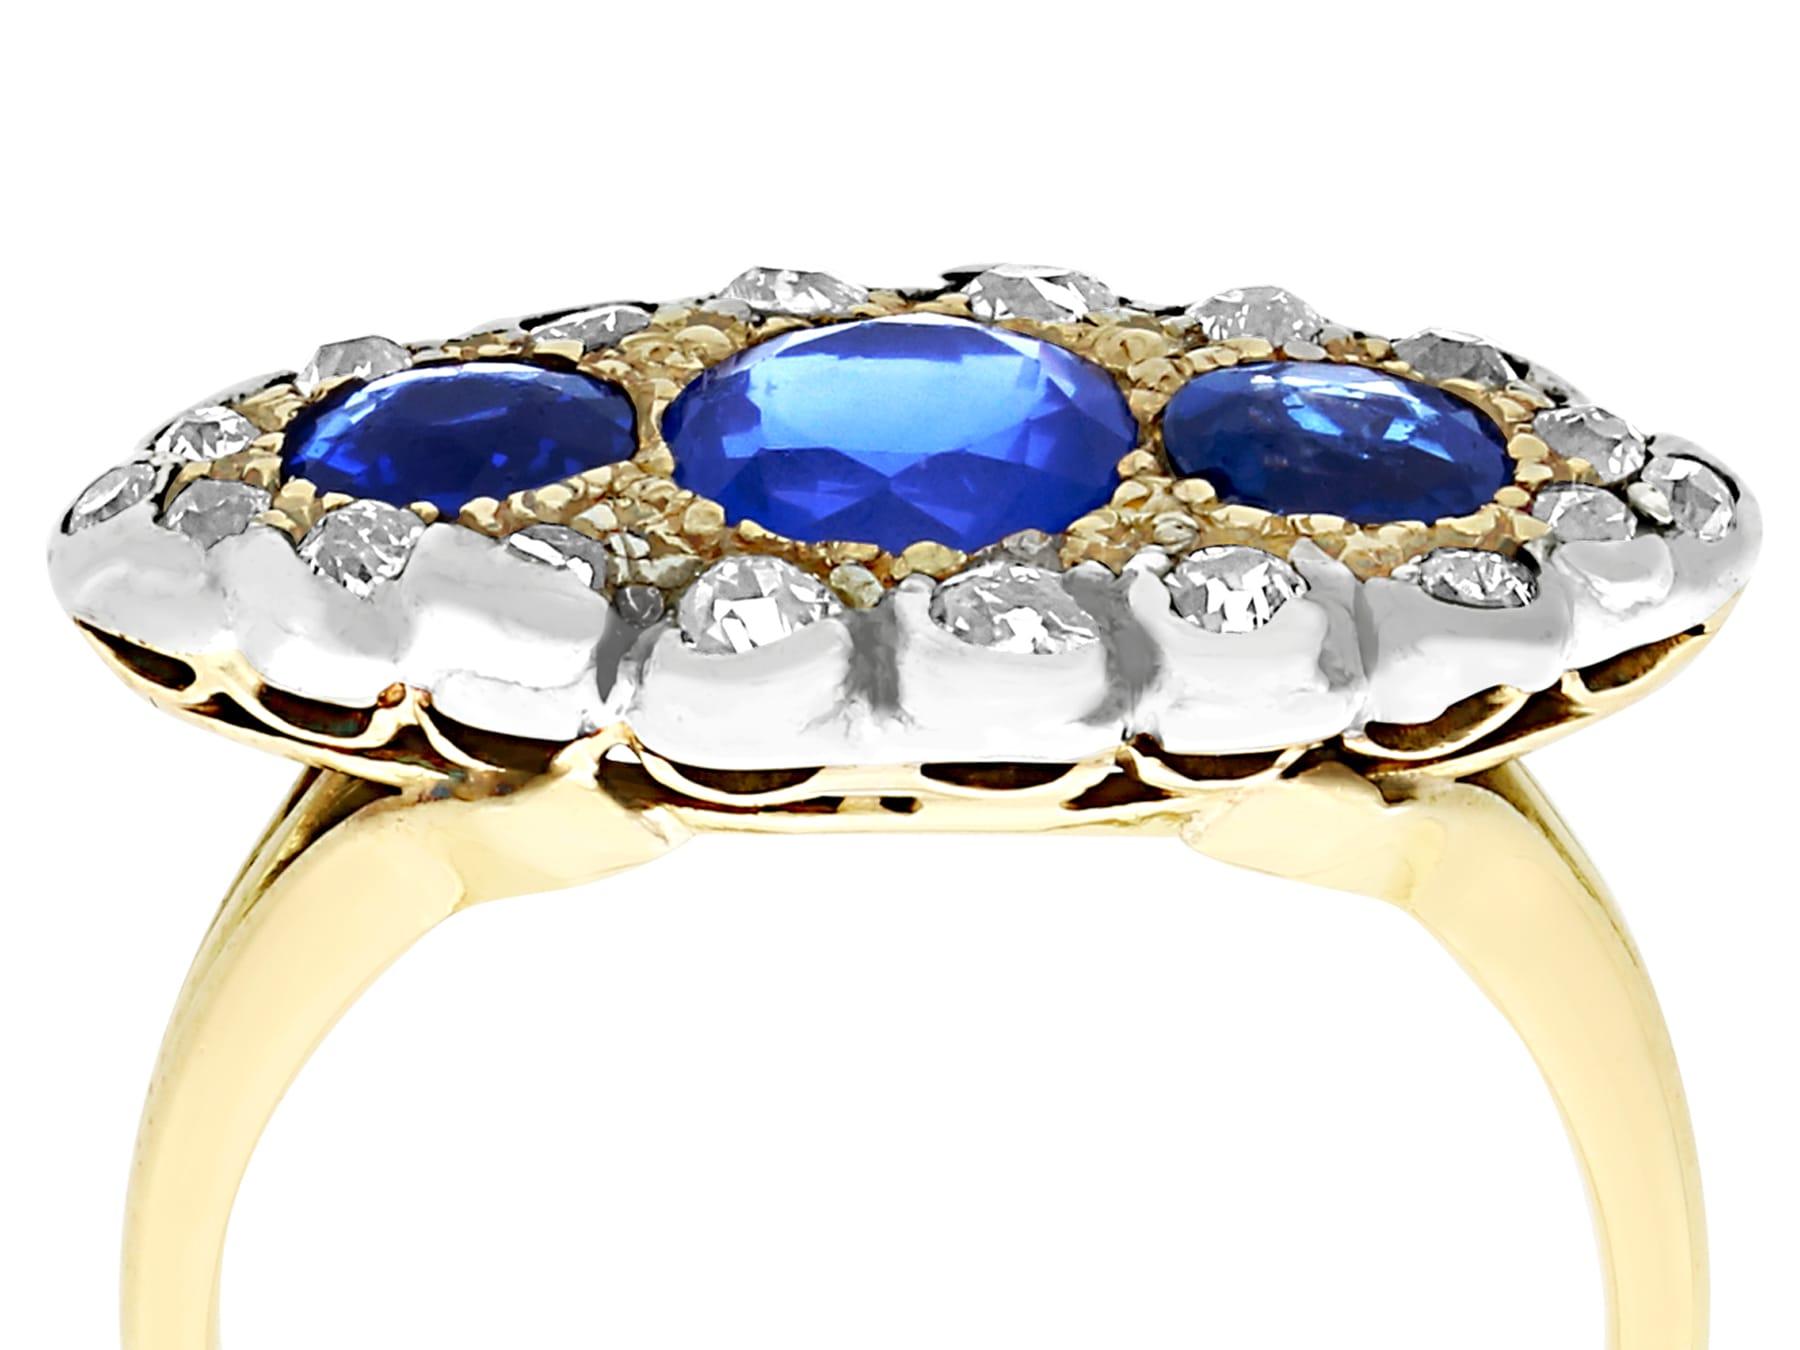 Cushion Cut Antique 1.48 Carat Sapphire 1.04 Carat Diamond Ring in Yellow Gold For Sale